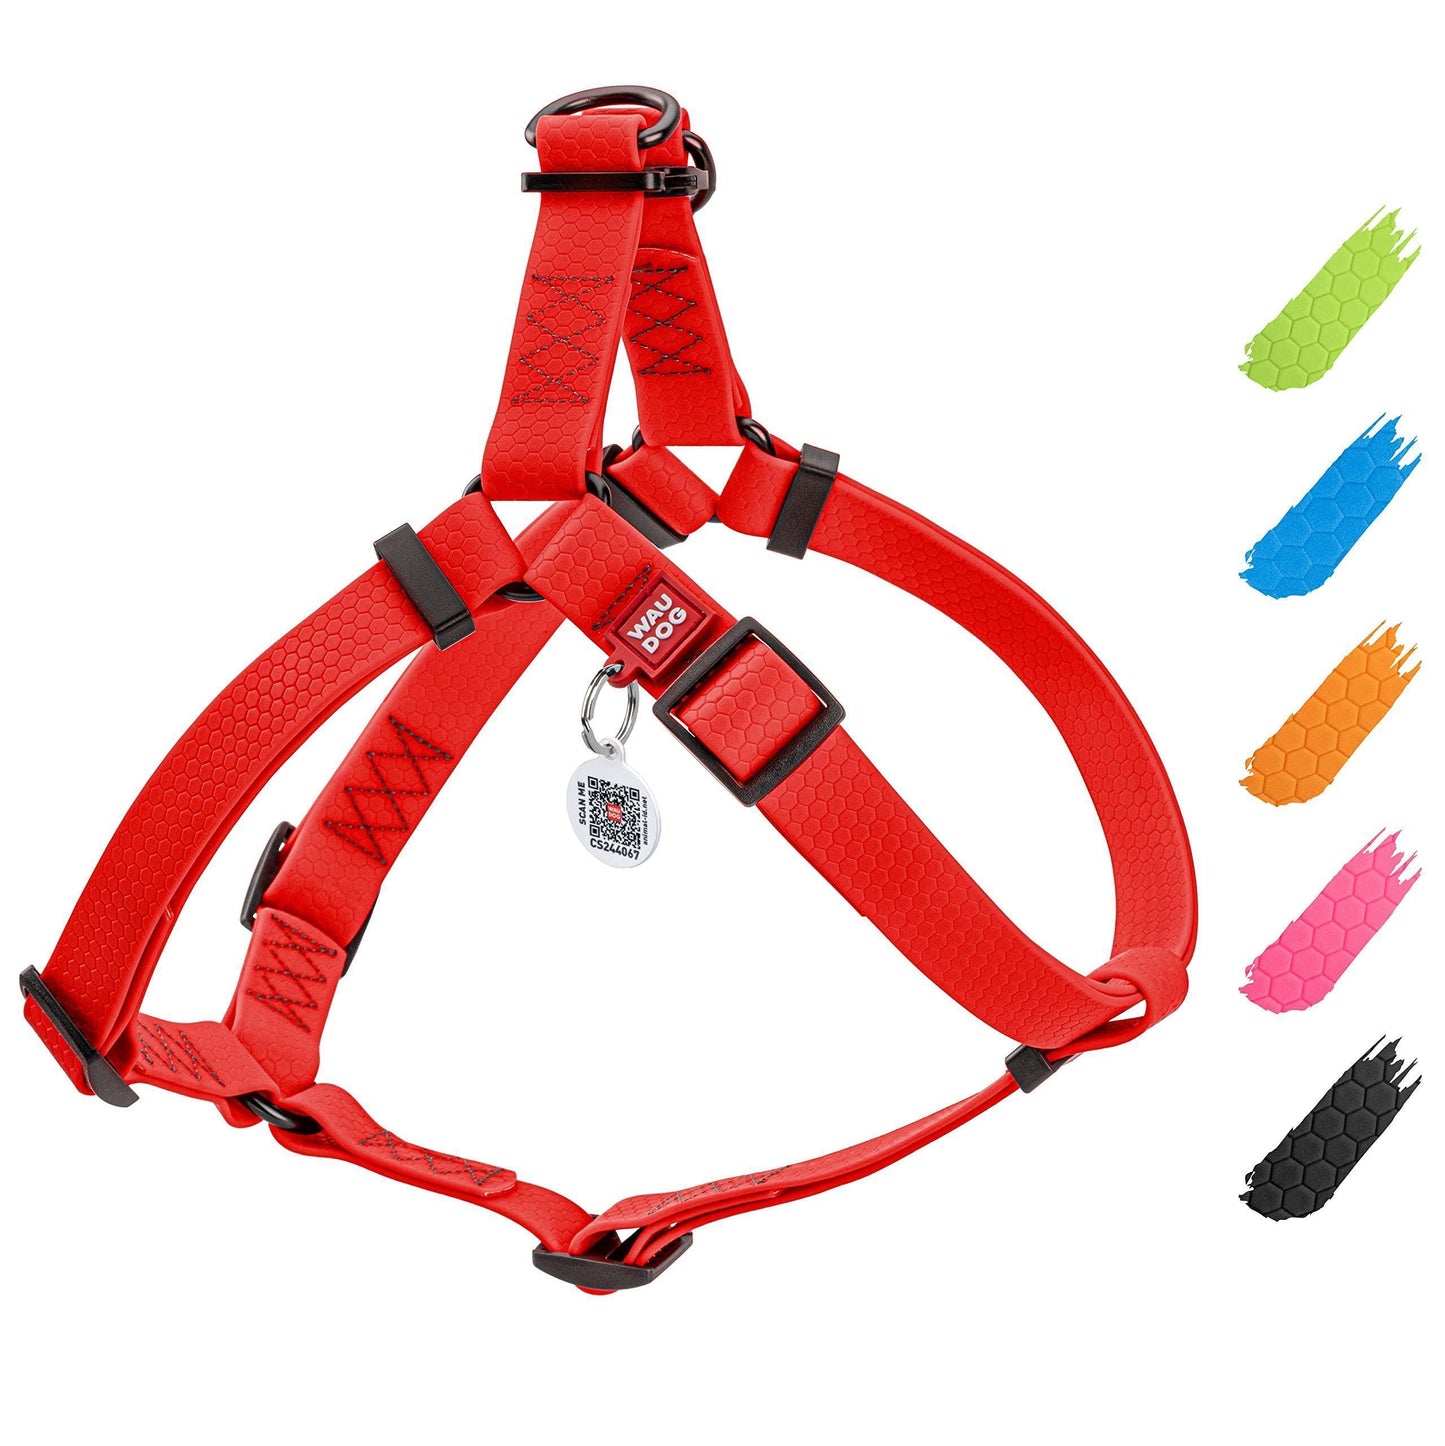 Waterproof Dog Harness Adjustable for Small Dogs Heavy Duty Harness with Durable Metal Clasp Red Color 16-22 inch S Size